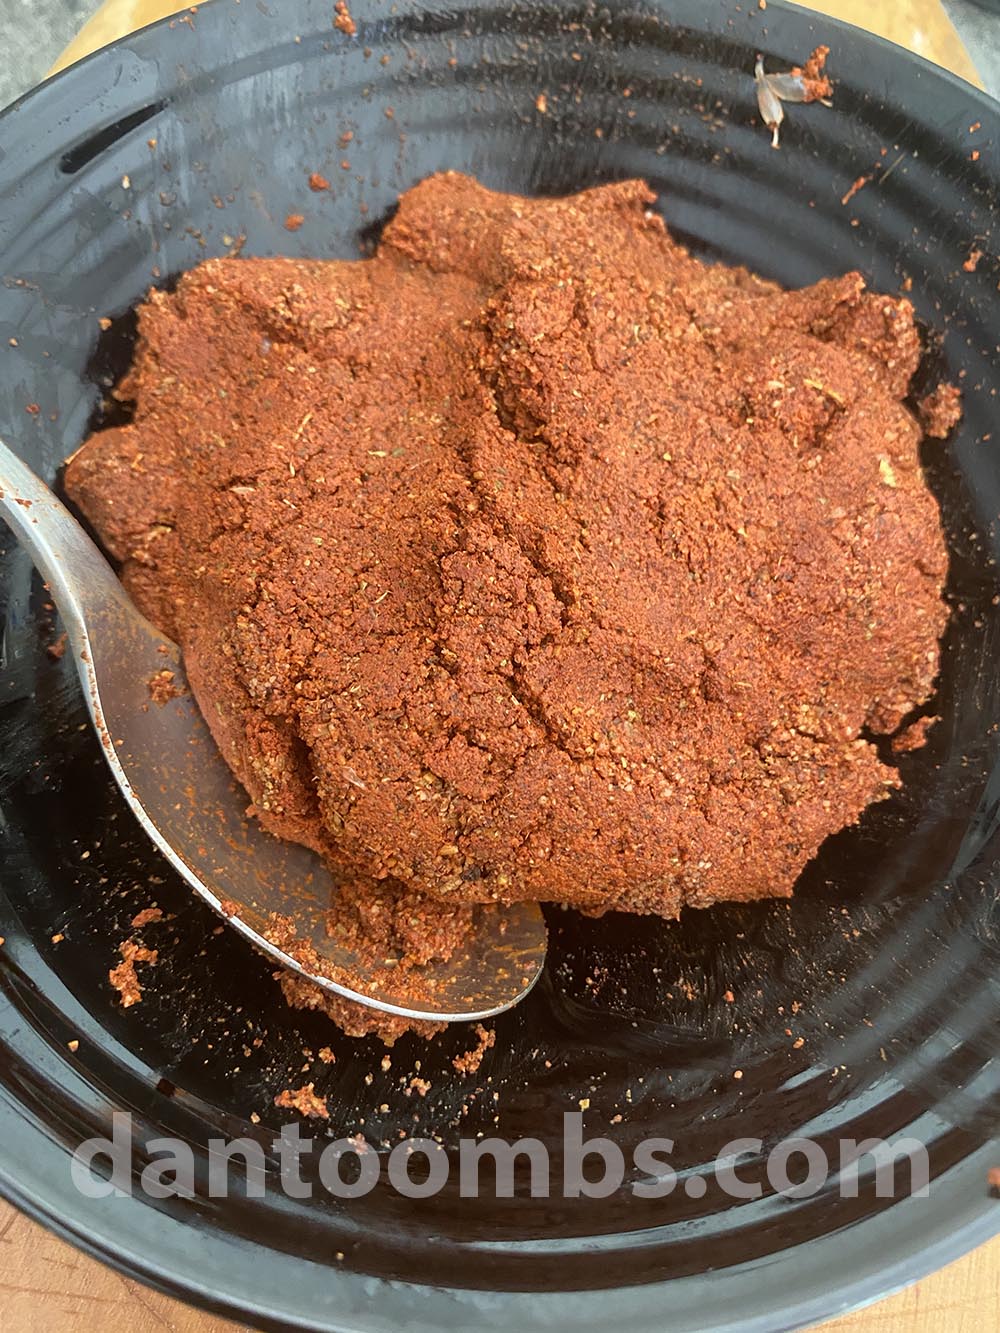 Finished achiote paste